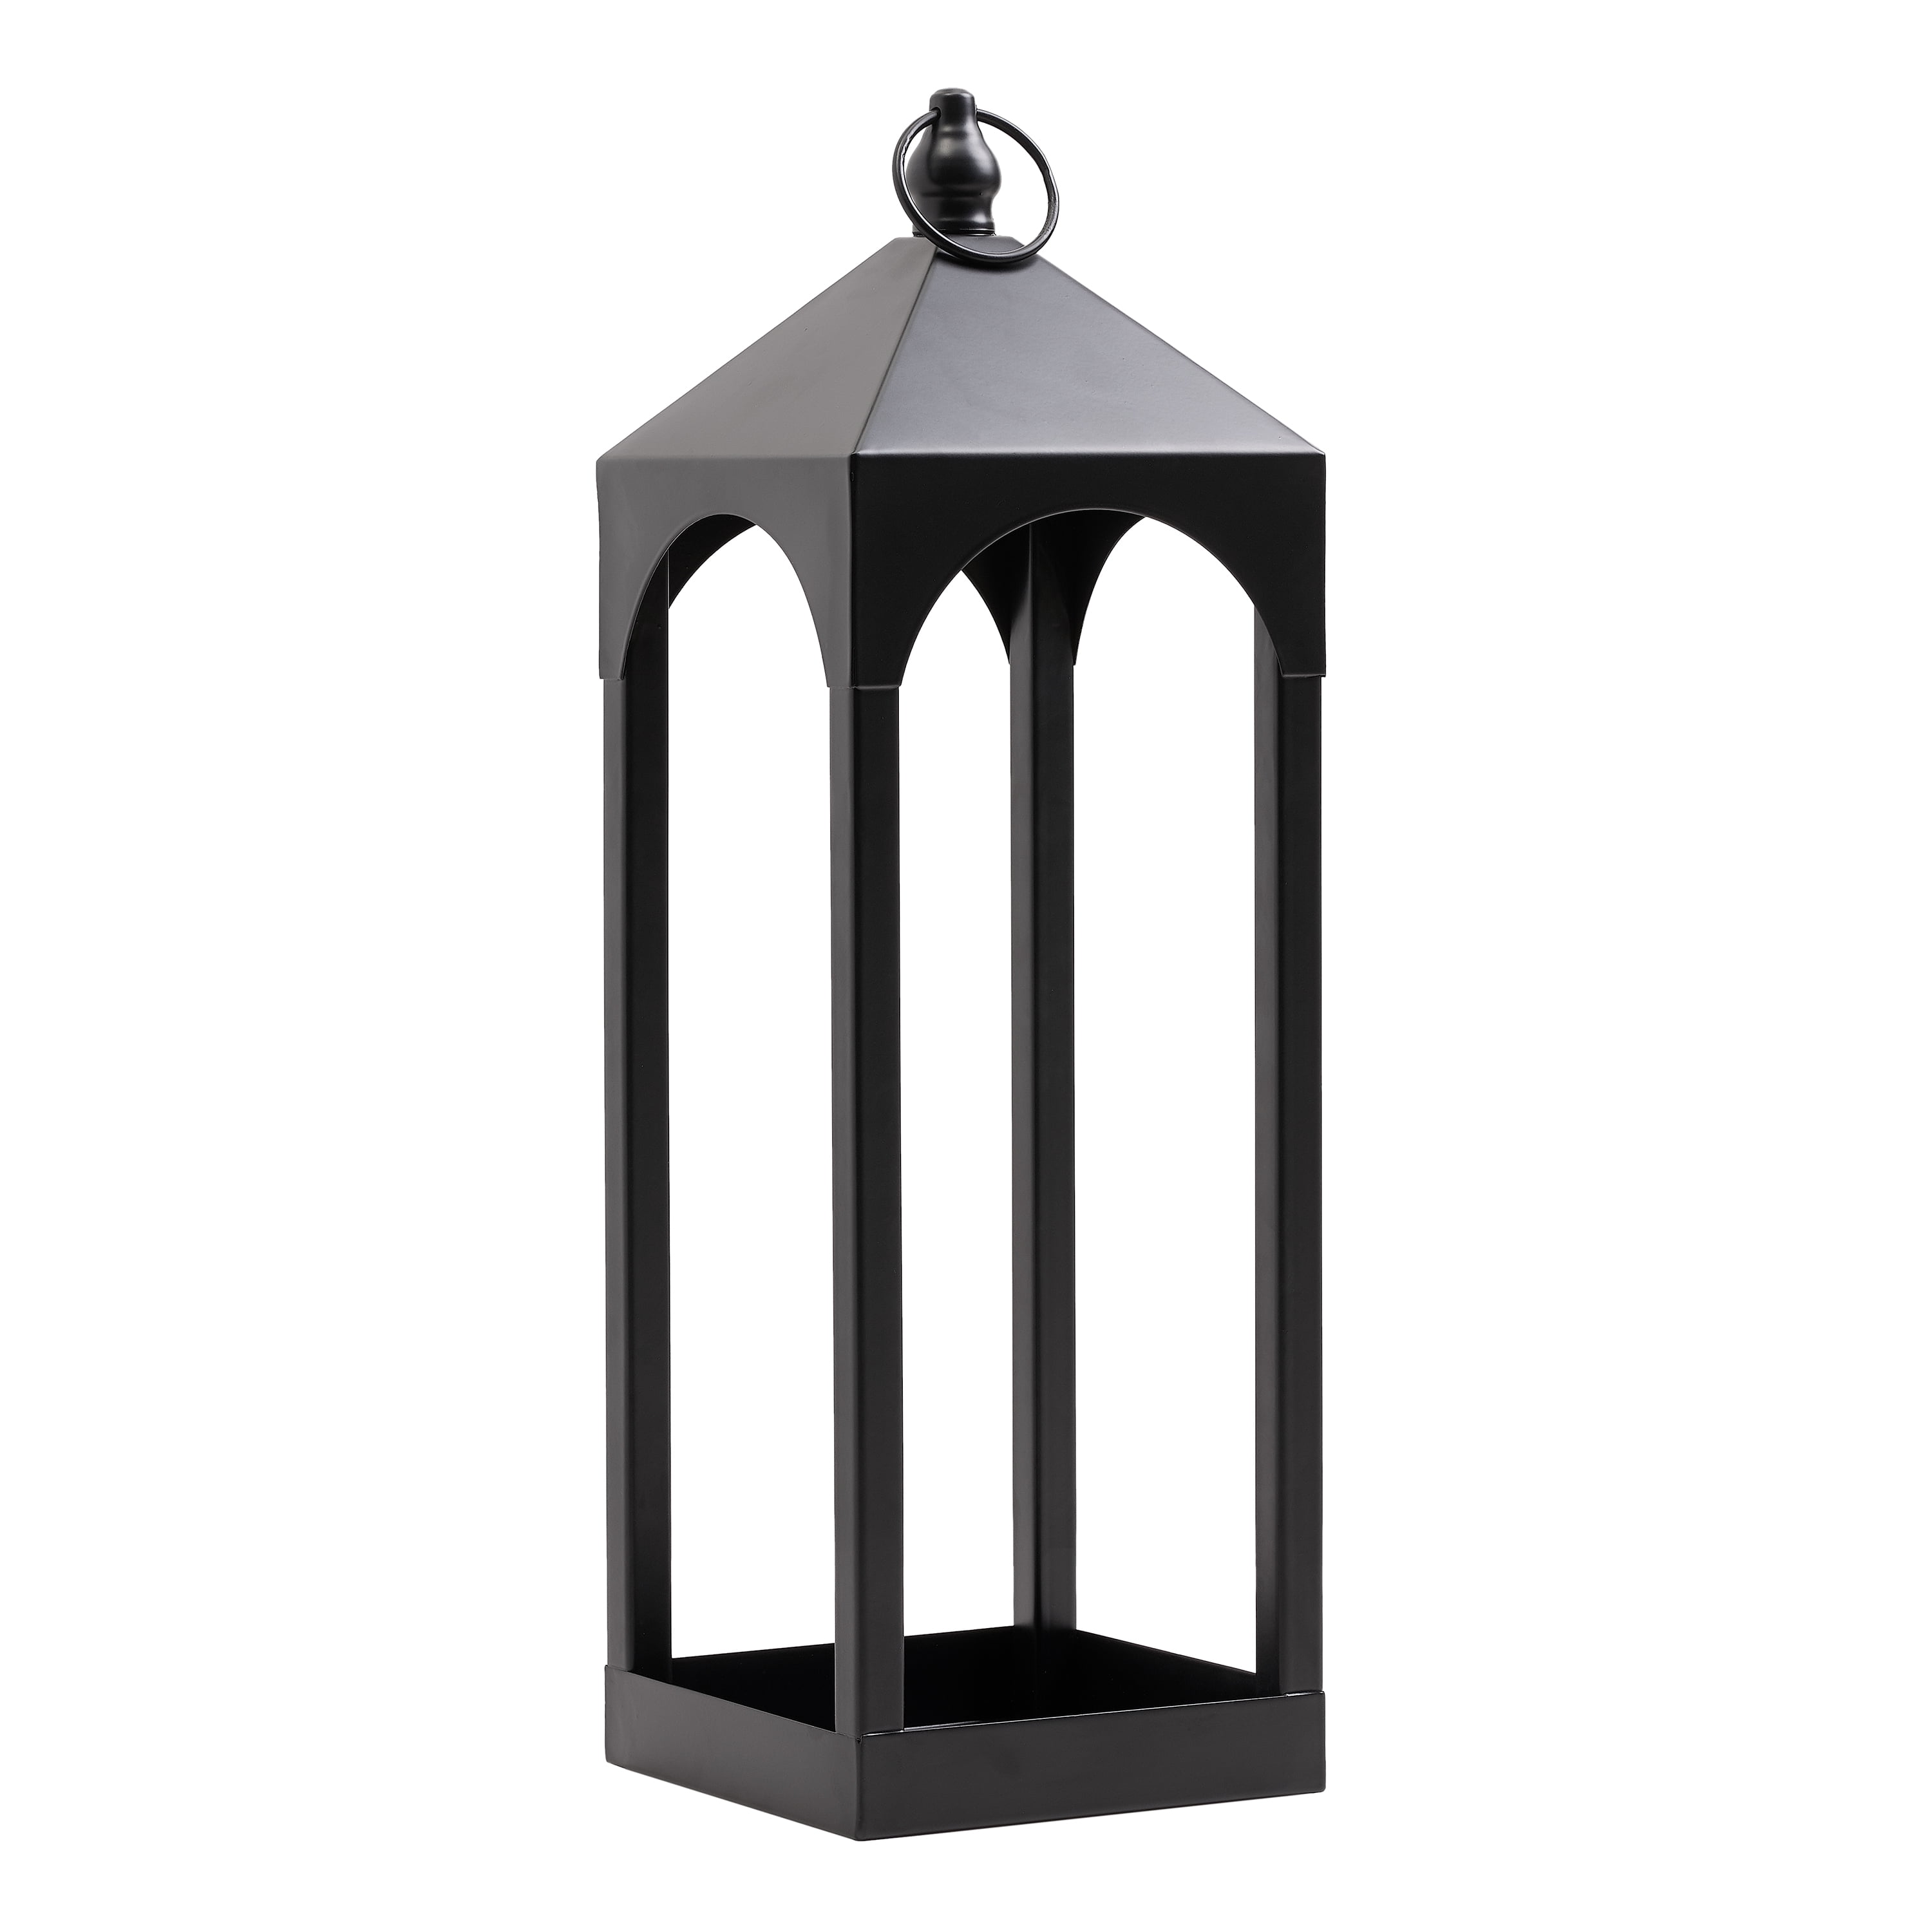 Details about   Mainstays Black Metal Lantern Home Event's and Wedding Decor 